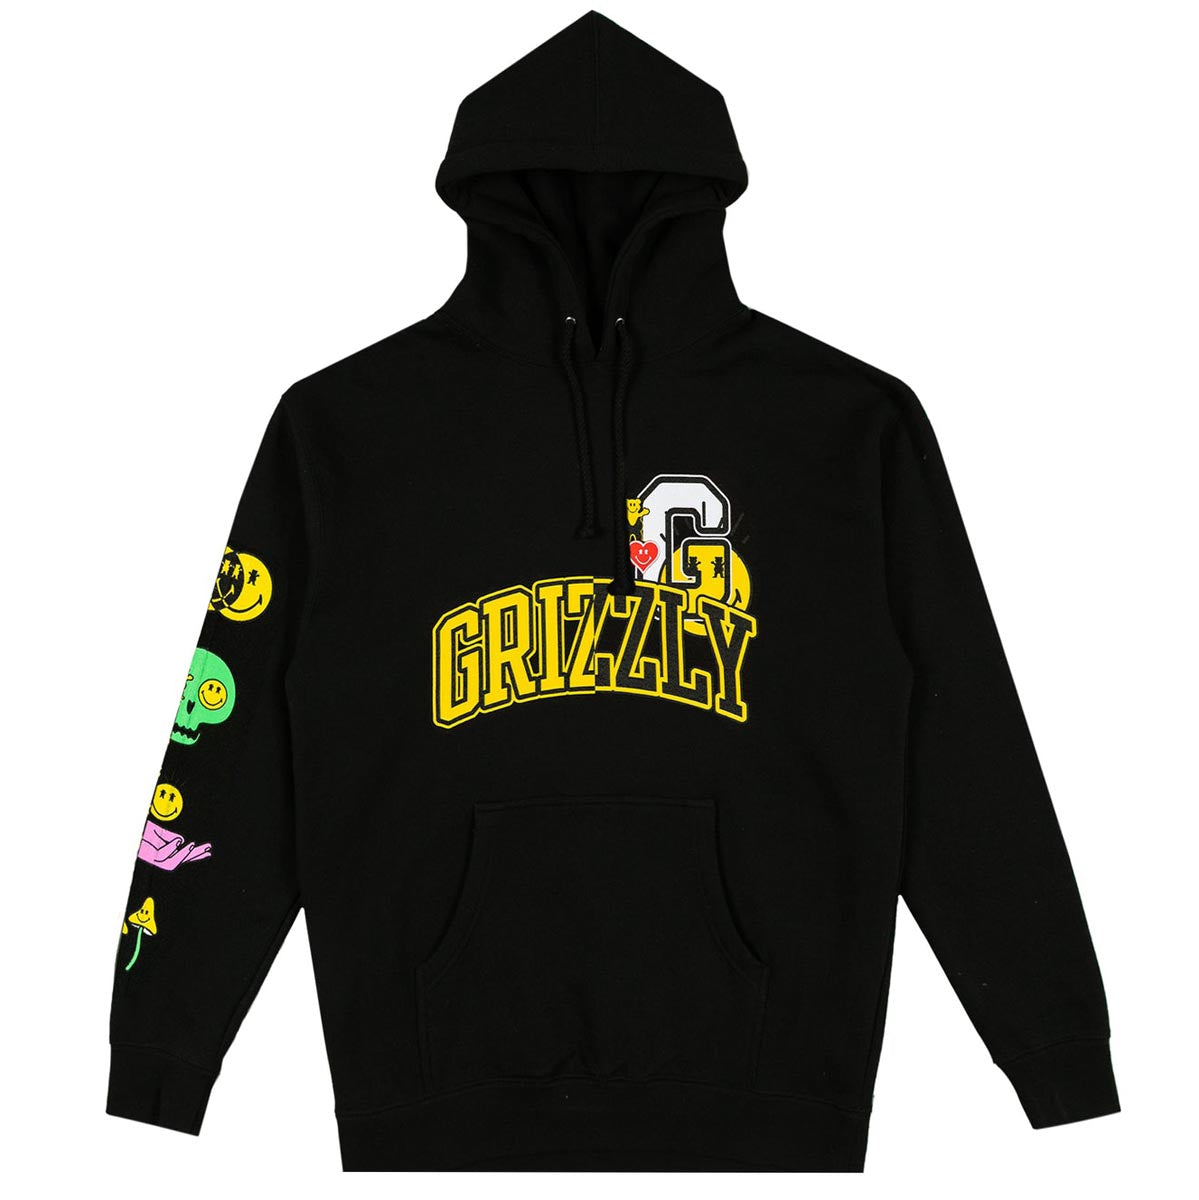 Grizzly x Smiley World Hoodie - Black image 1